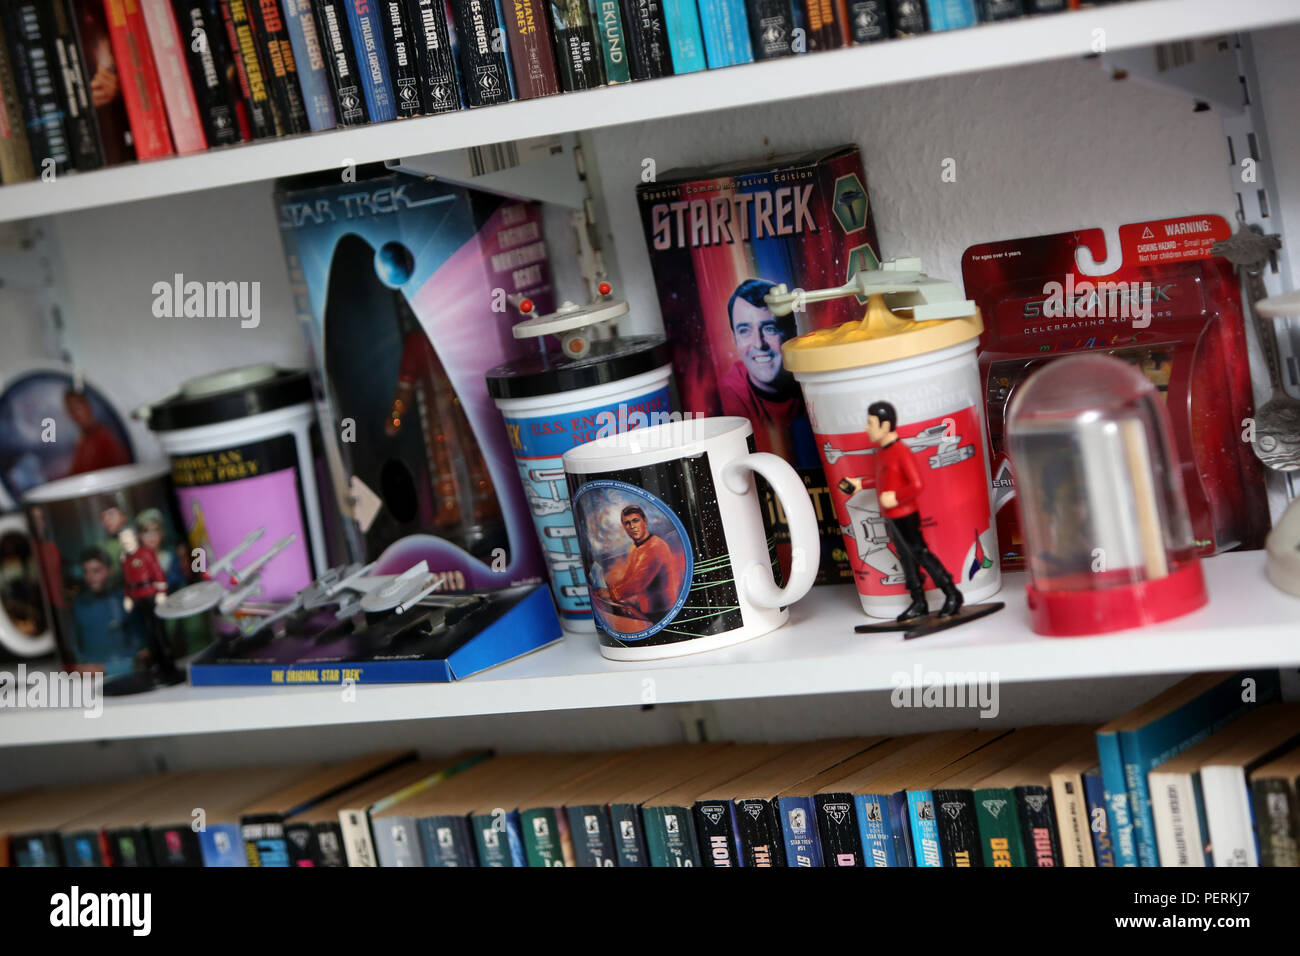 Science fiction books and memorabilia pictured in a house in Sussex, UK. Stock Photo